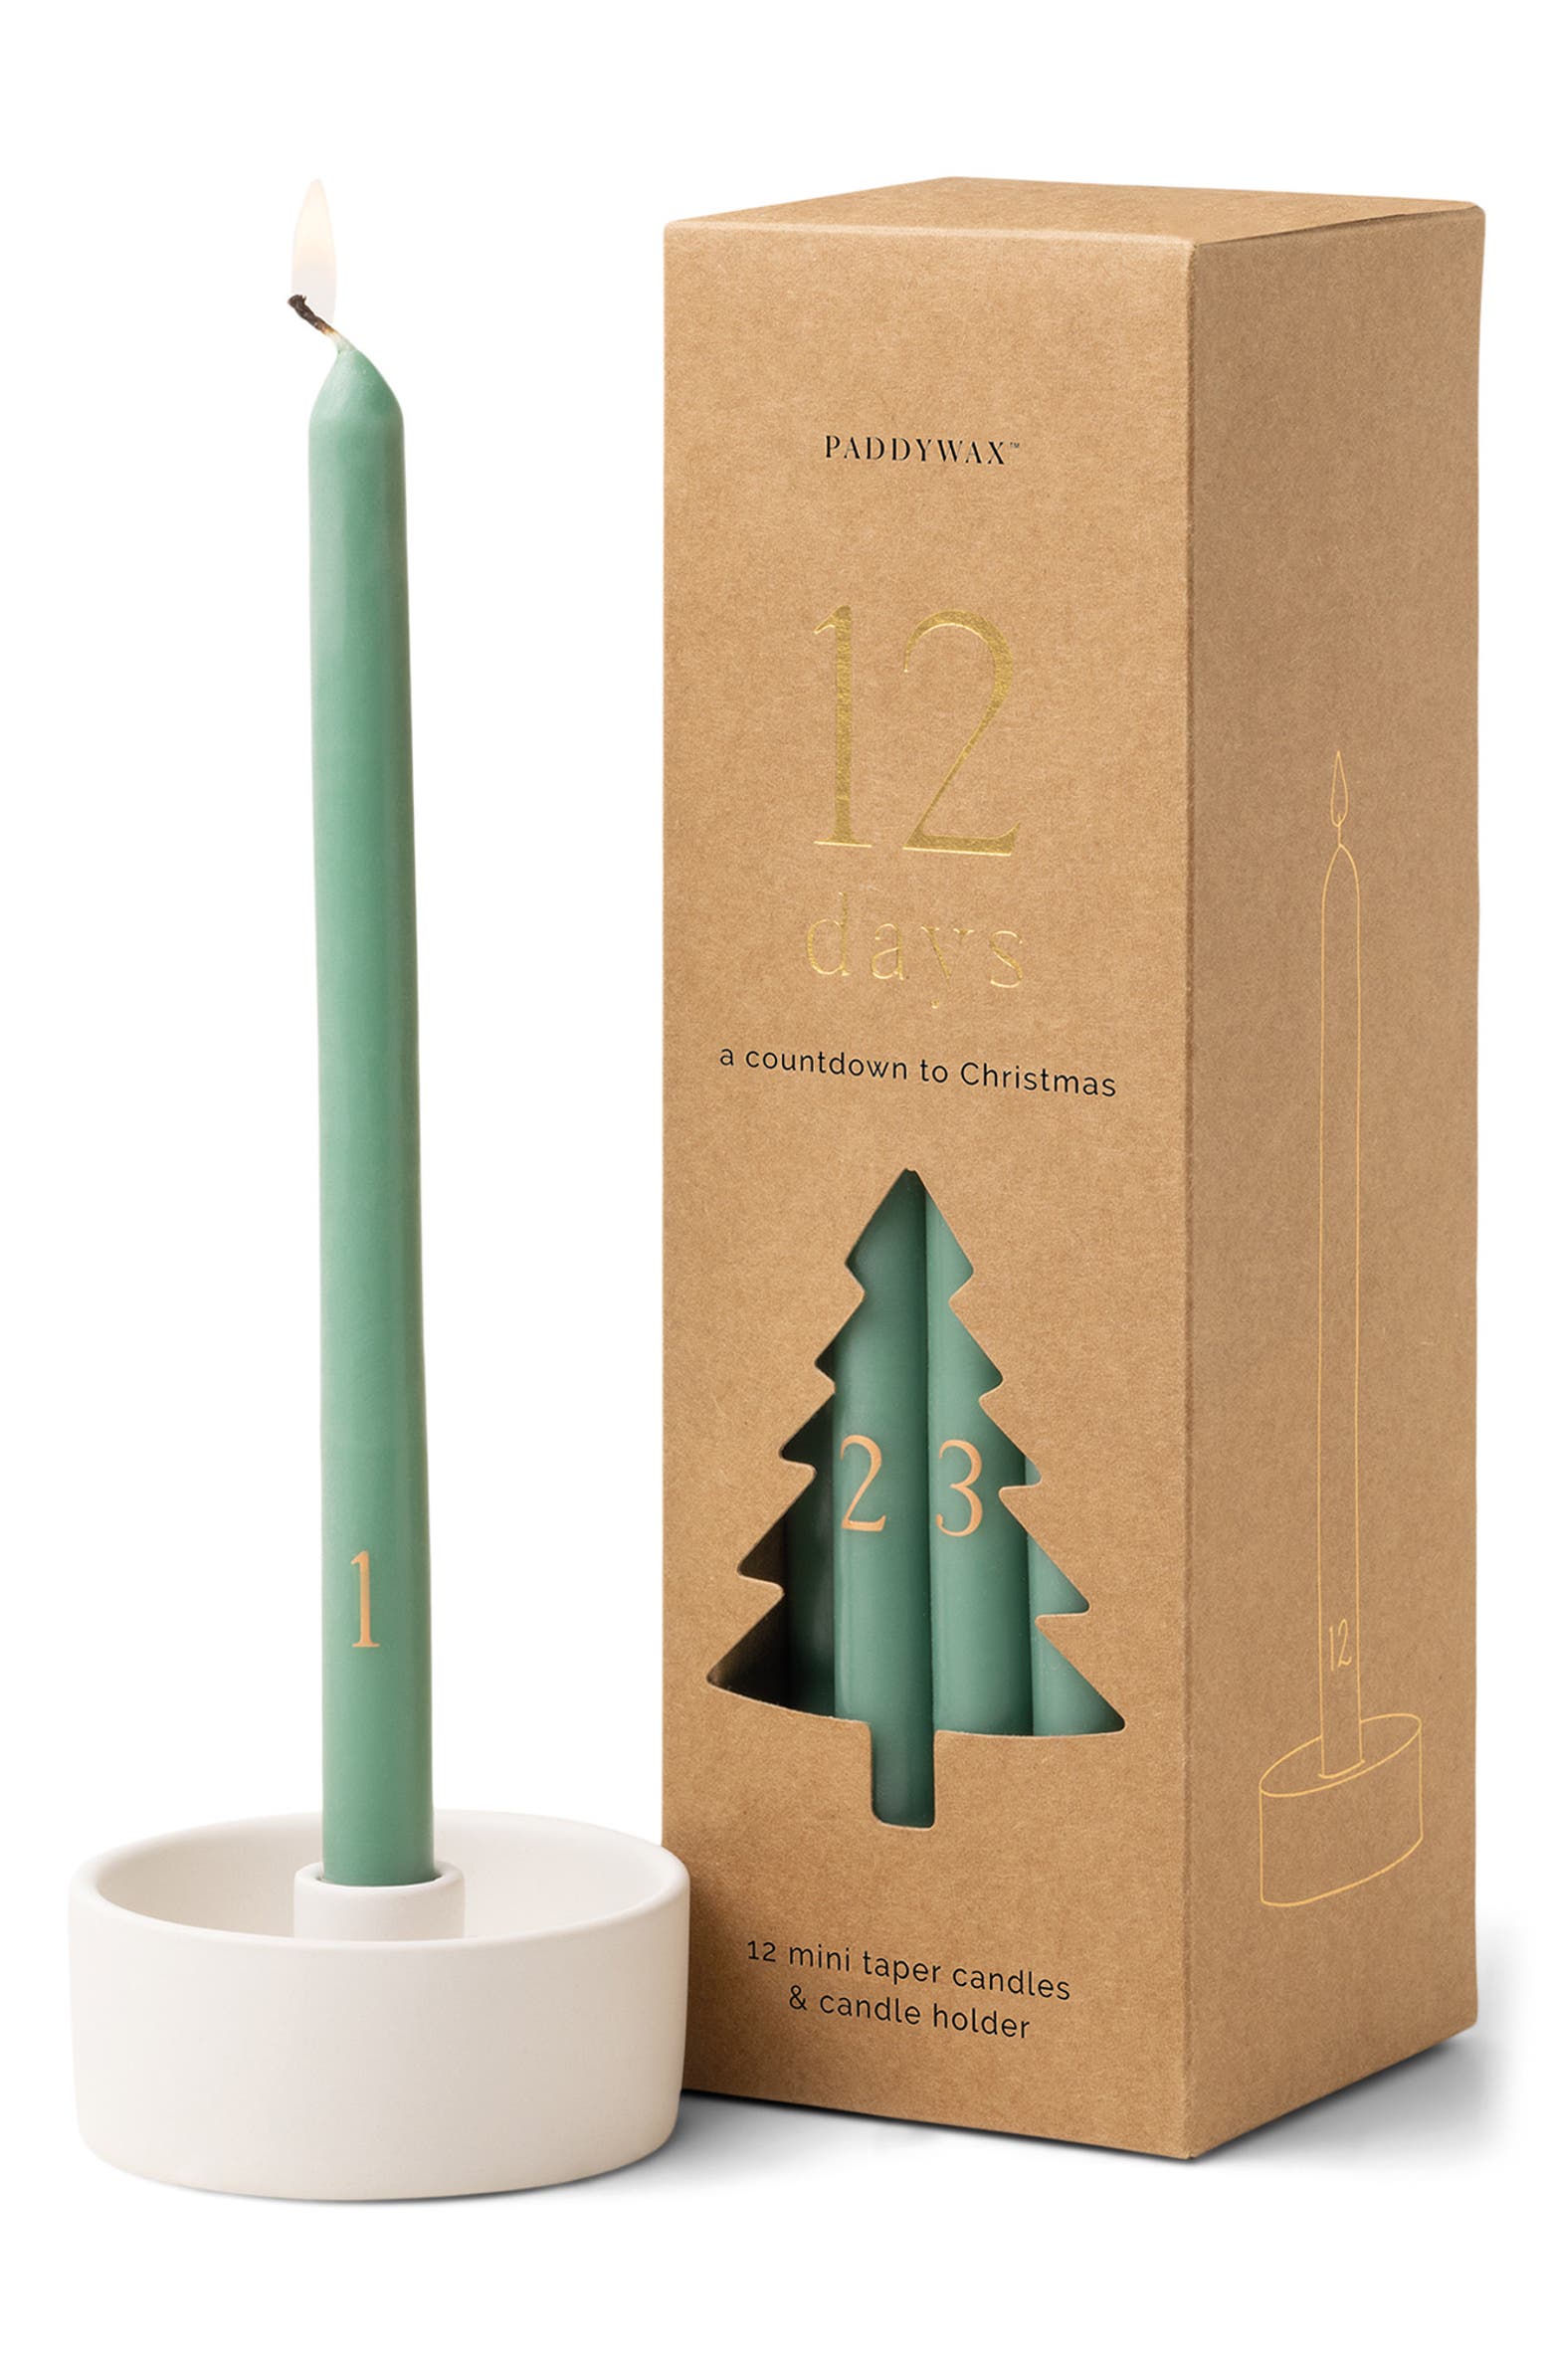 PADDYWAX Countdown to Christmas Set of 12 Mini Taper Candles & Candle Holder